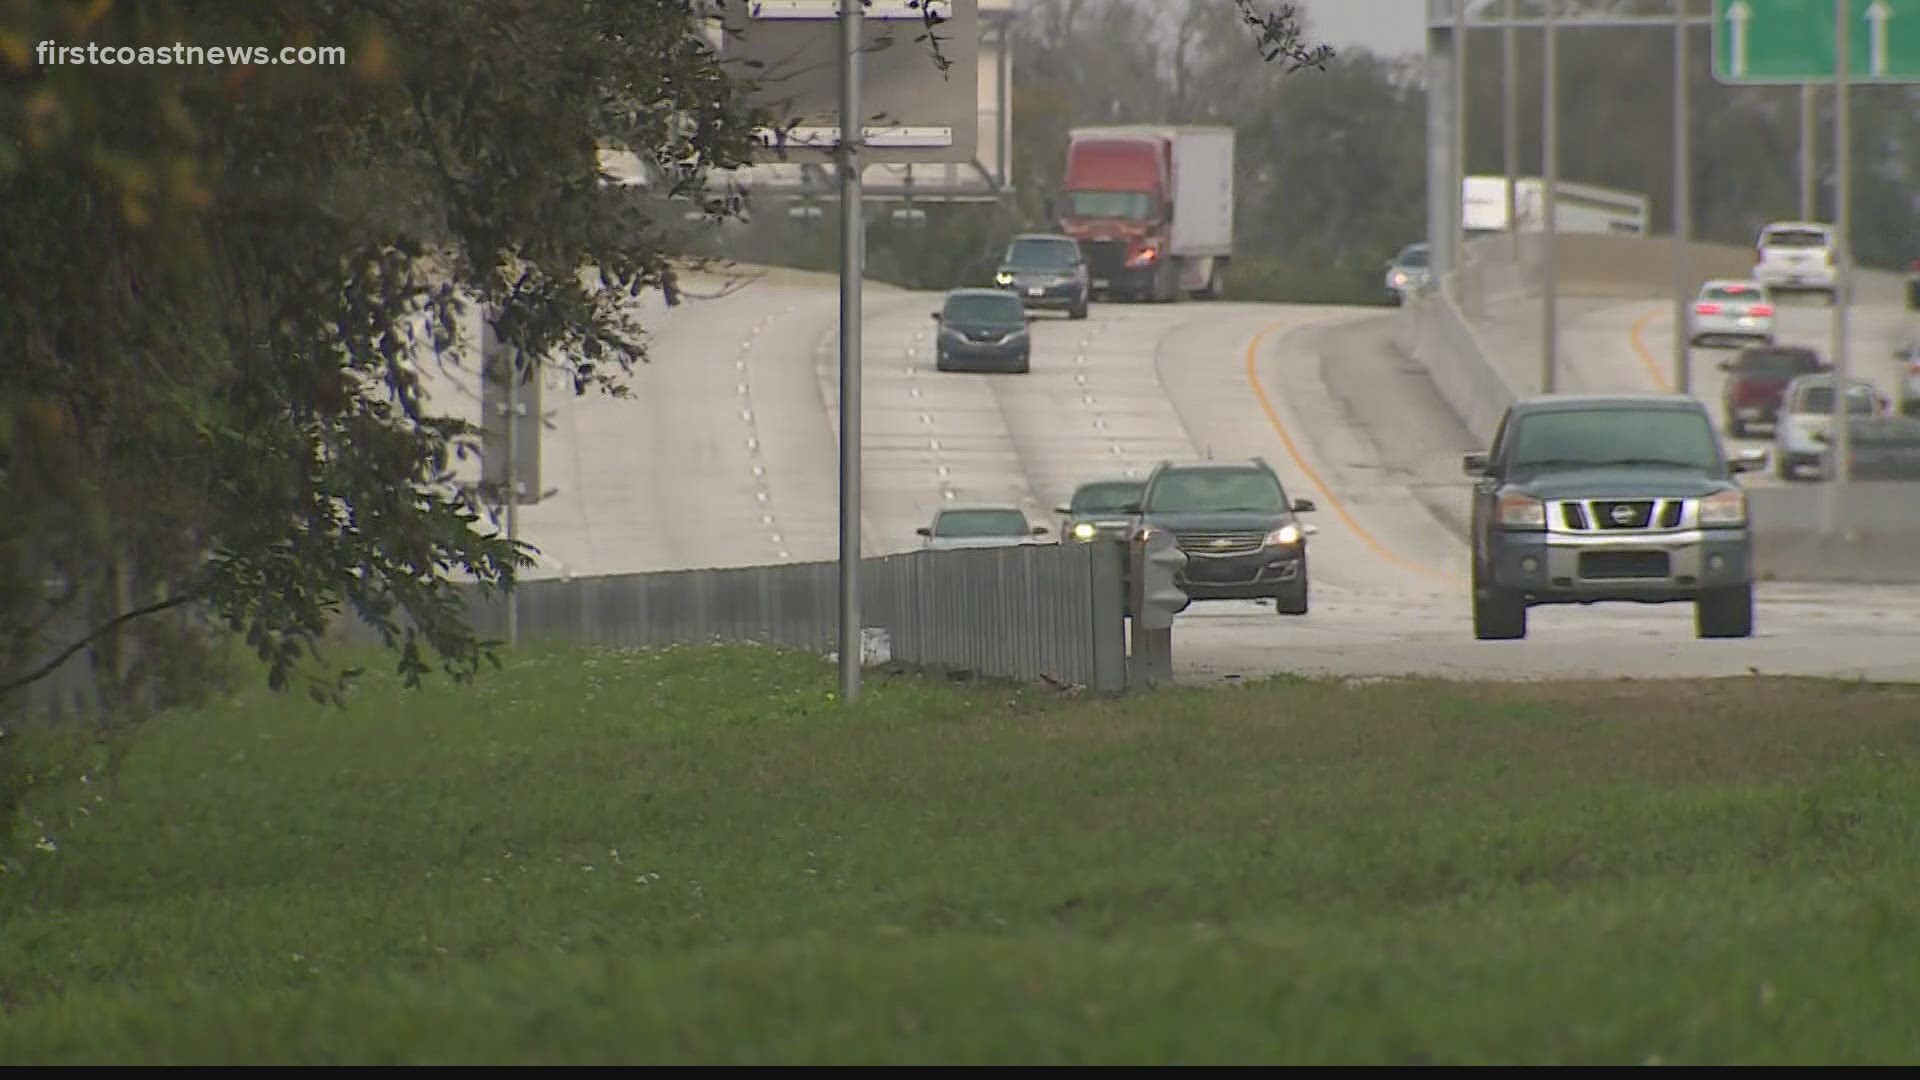 Tuesday has the highest amount of crashes, according to data from the Florida Highway Patrol.